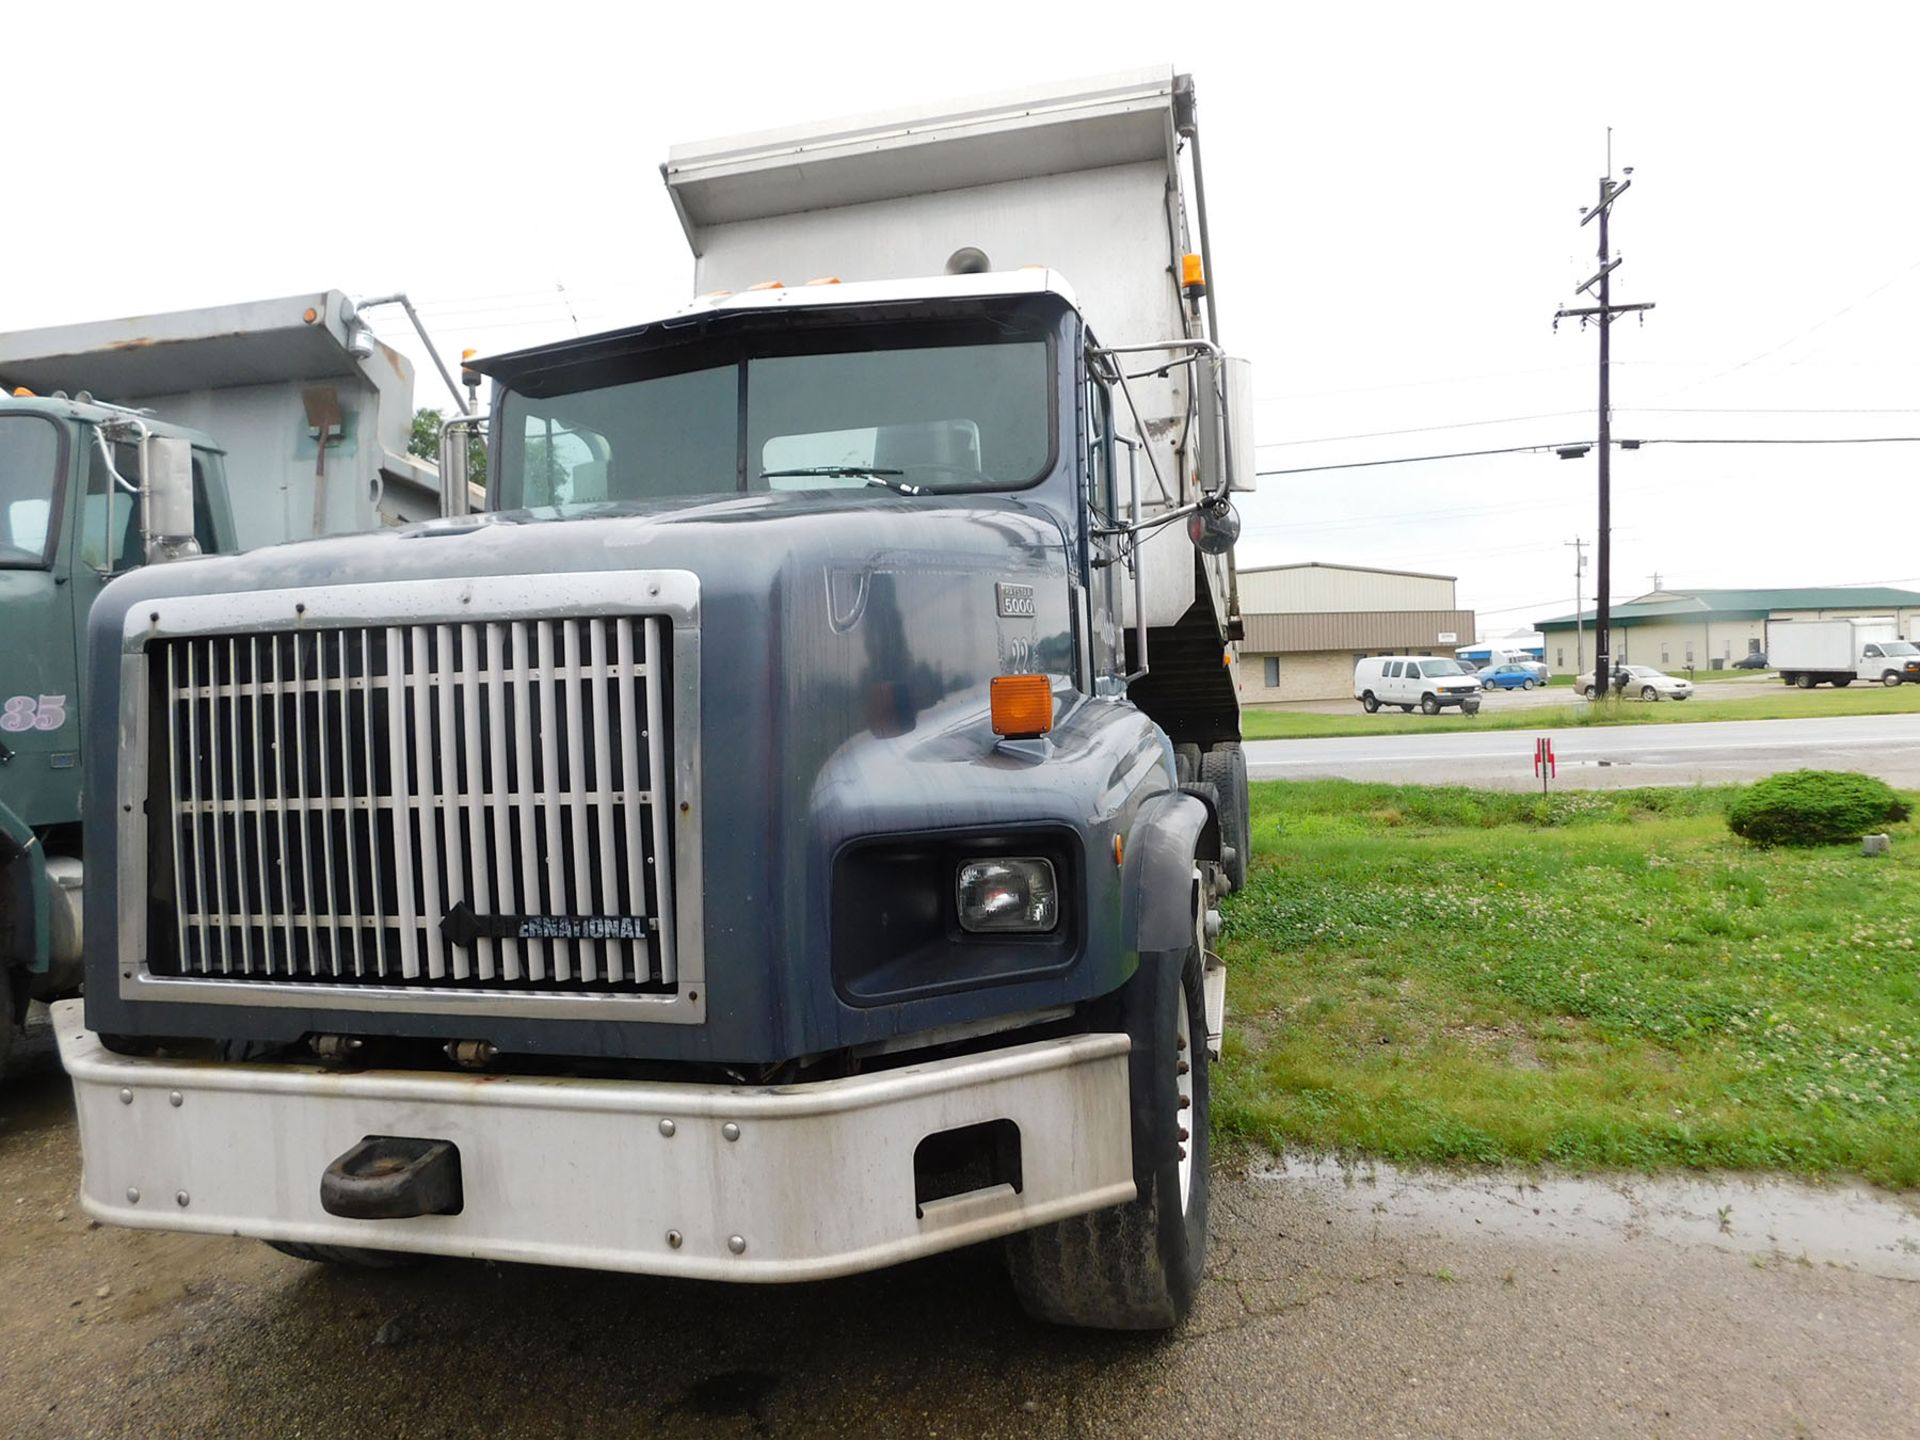 1999 PAYSTAR DUMB TRUCK; CATERPILLAR C-12, ROADRANGER 8-SPEED TRANSMISSION WITH DEEP REDUCTION, 6- - Image 3 of 8